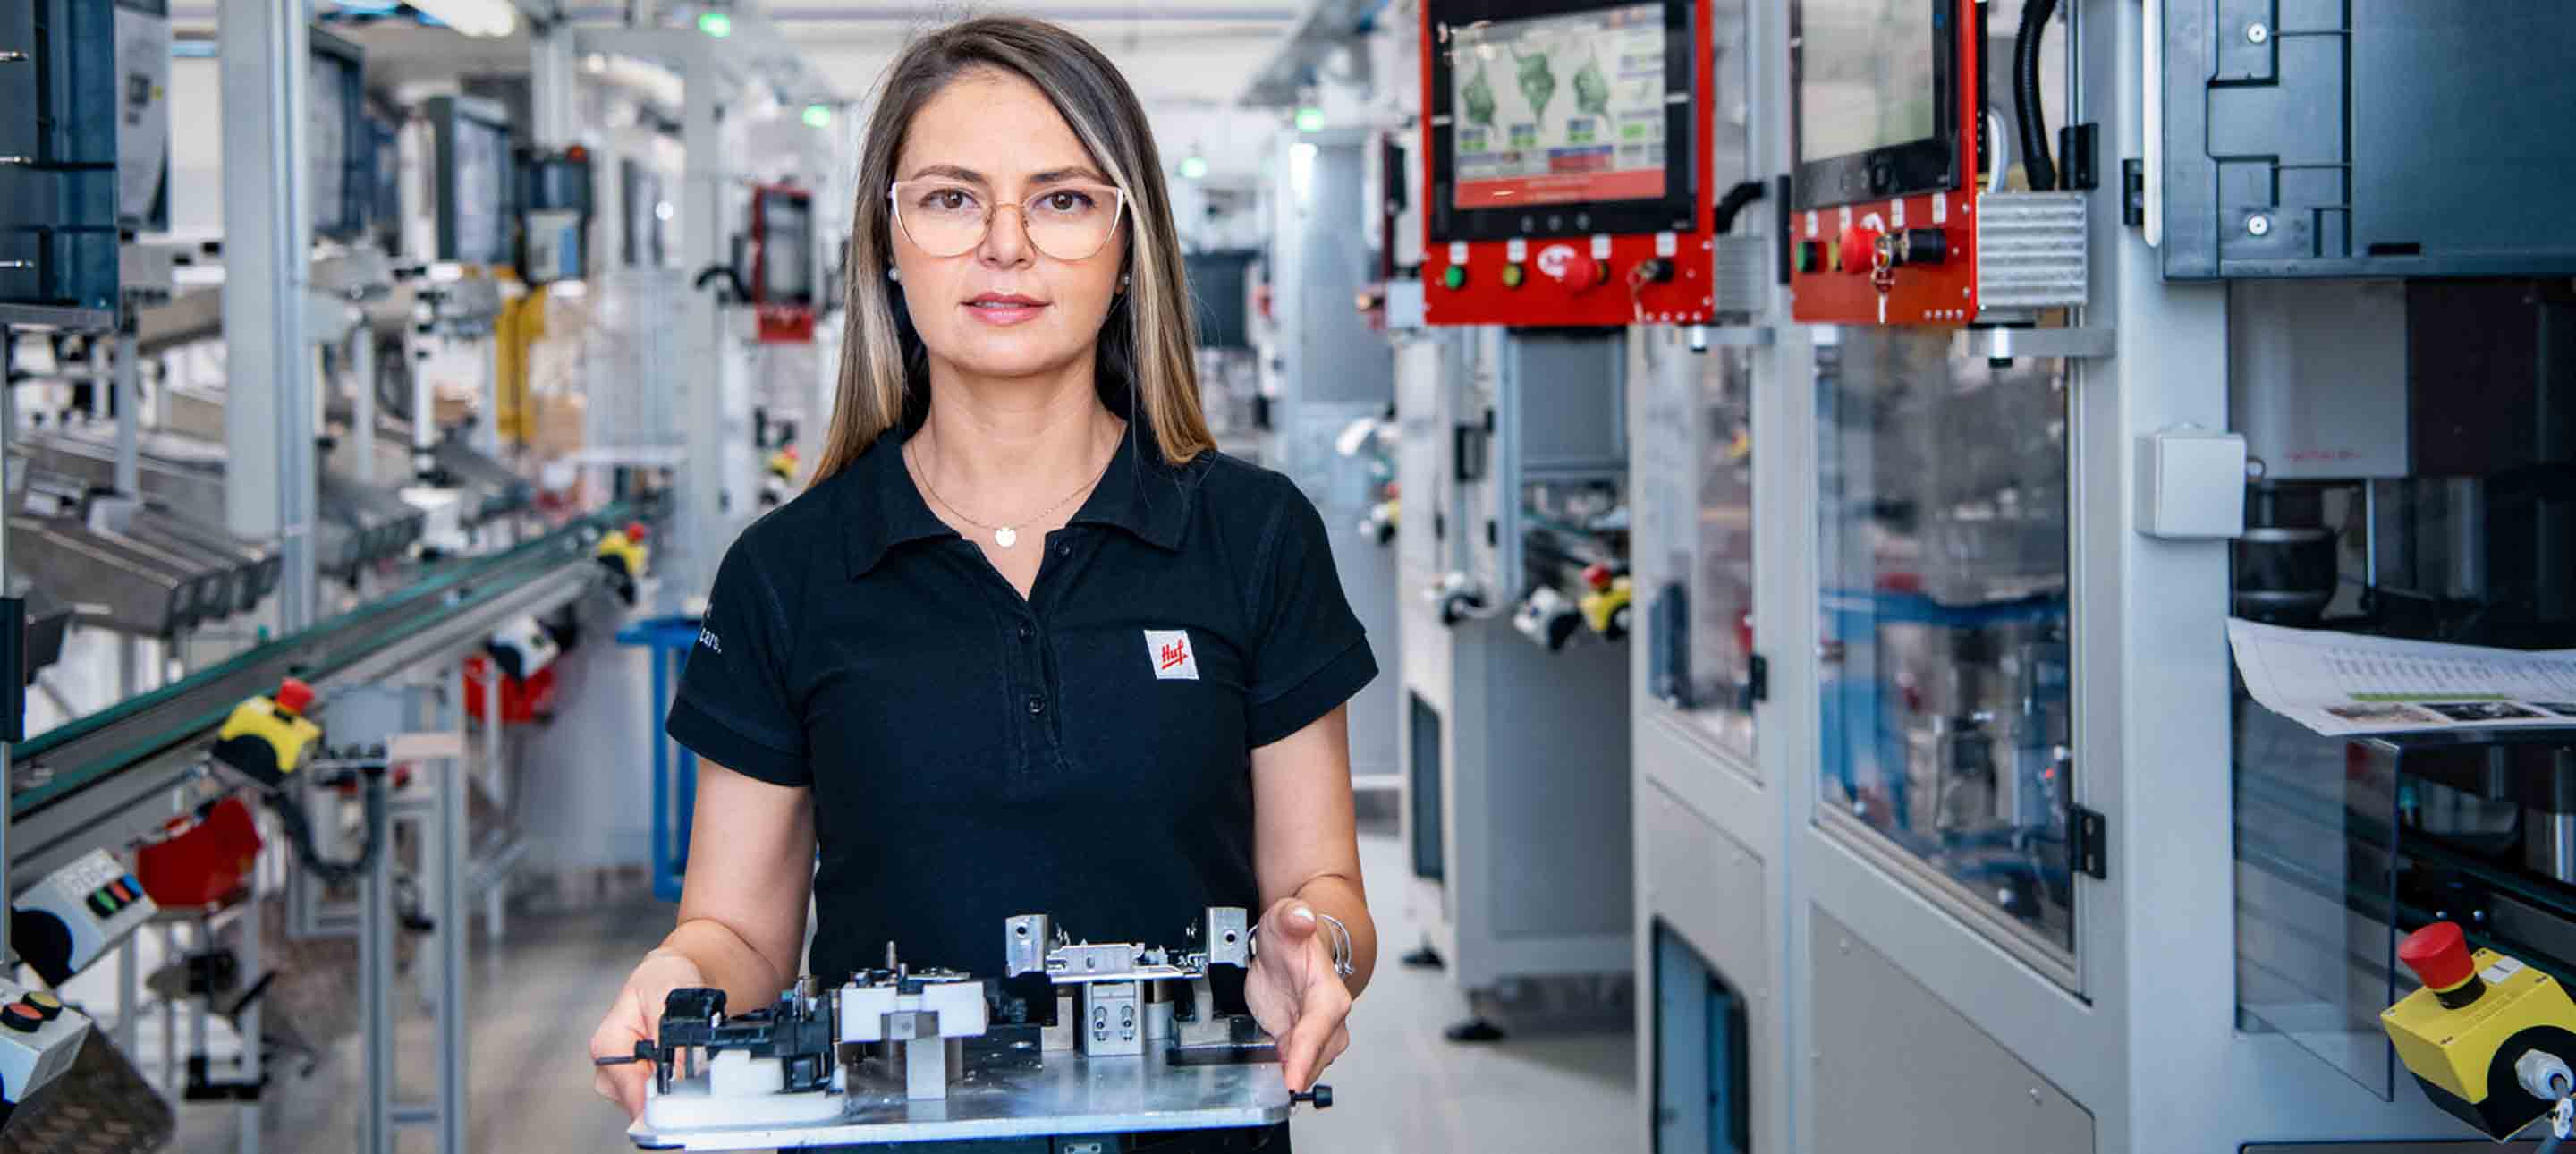 Female Huf employee for engineering at prodcution site holding electronic components